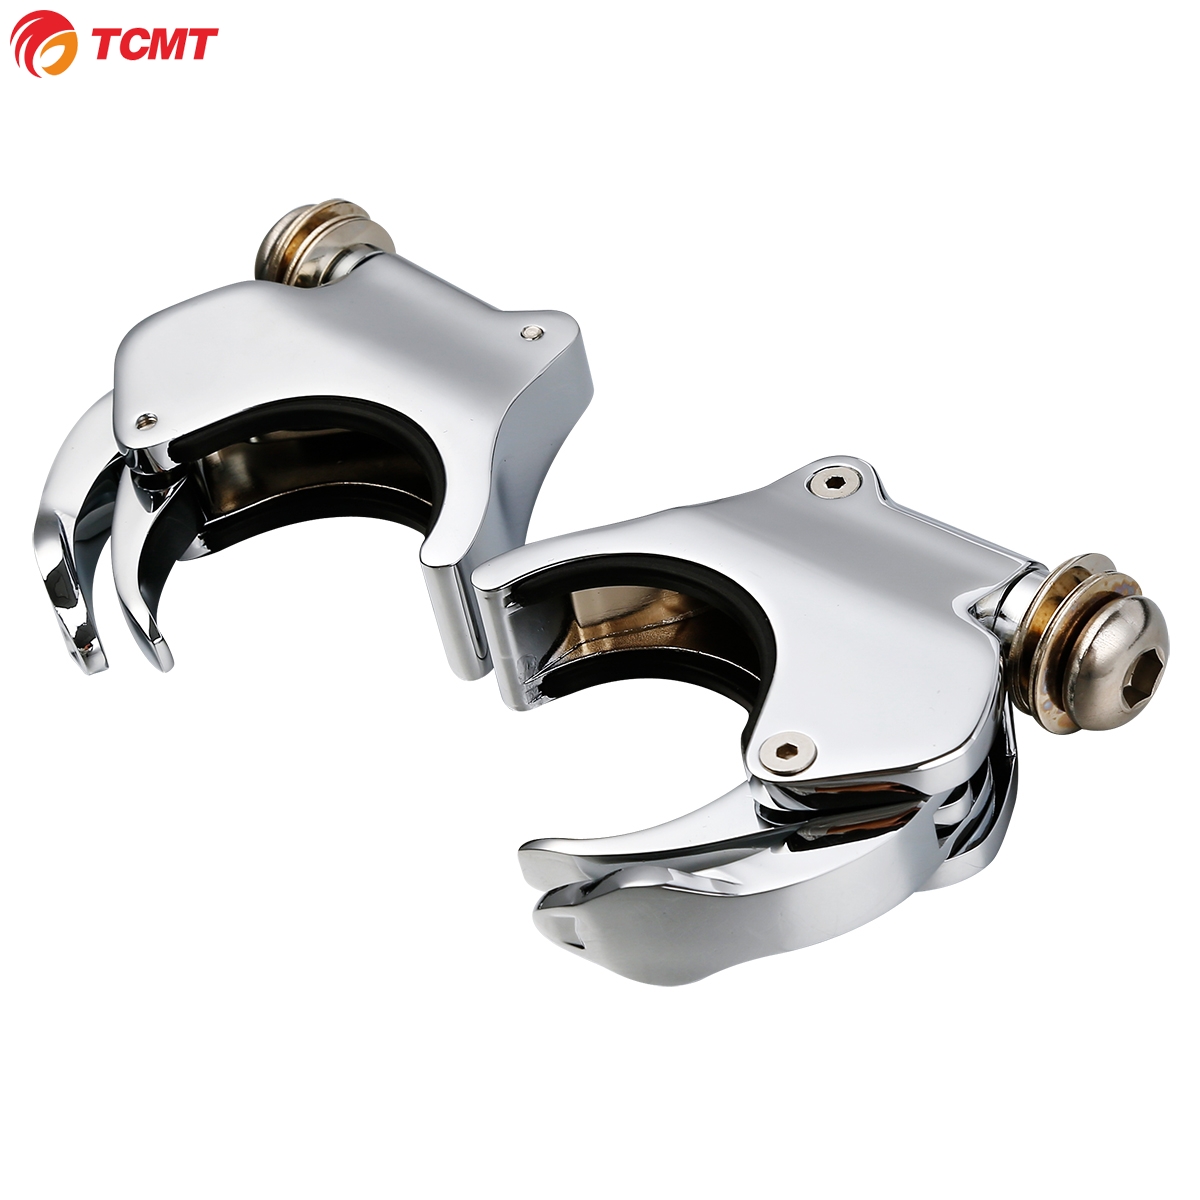 Detachable 49mm Windshield Clamp Fit For Harley Dyna Super Glide Low Rider 06-Up 